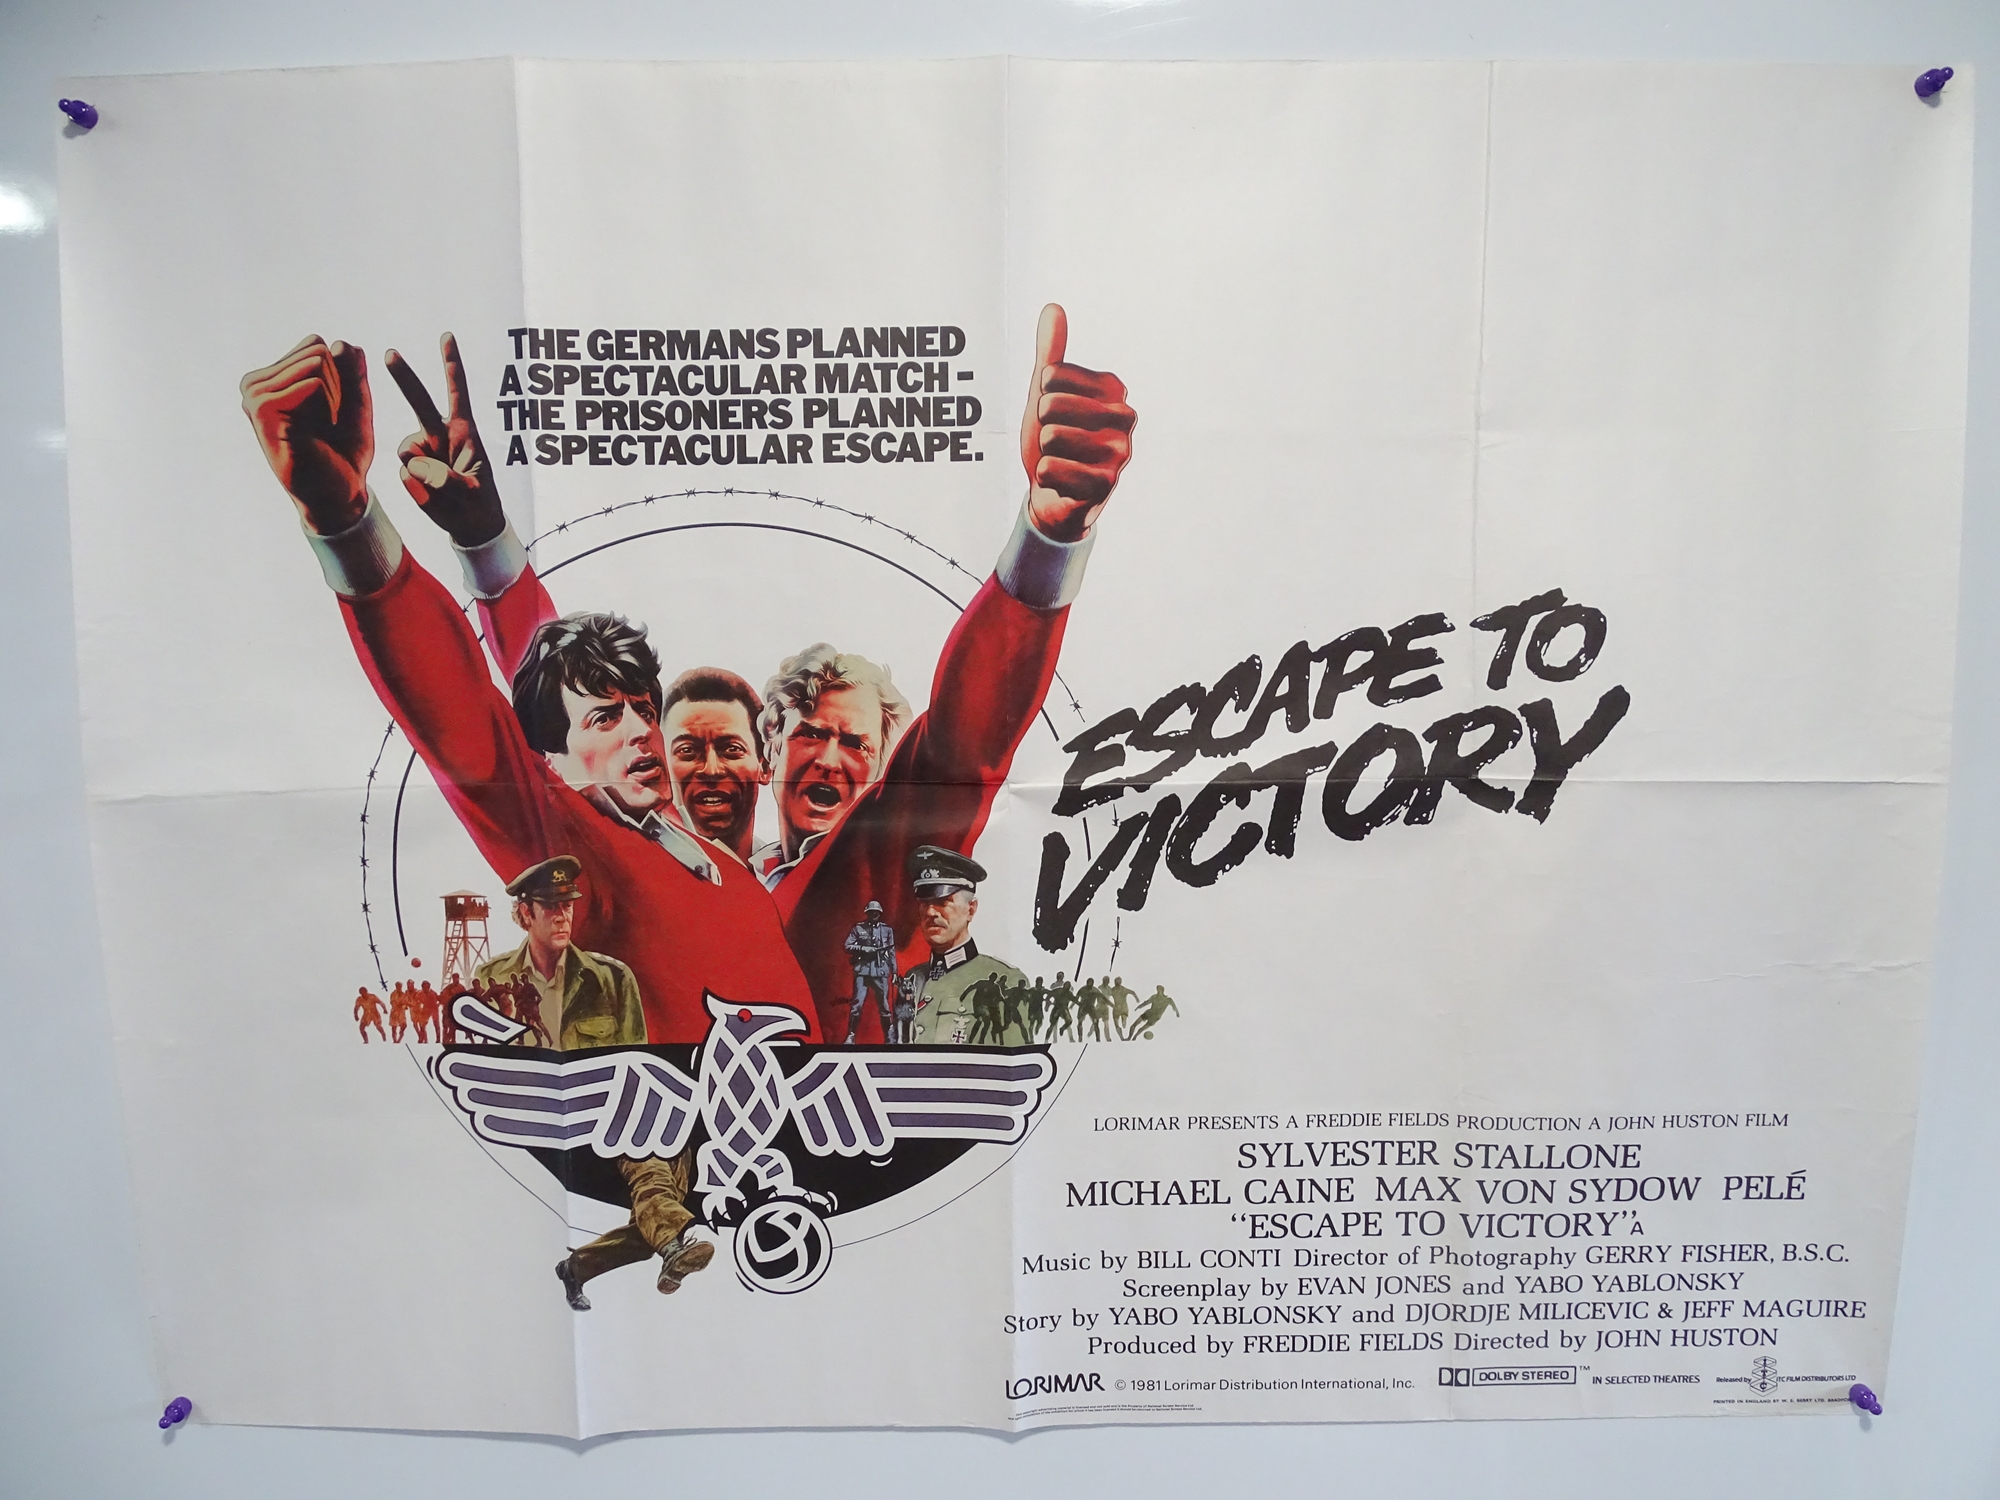 ESCAPE TO VICTORY (1980) - British UK Quad - Jarvis artwork featuring Michael Caine, Sylvester